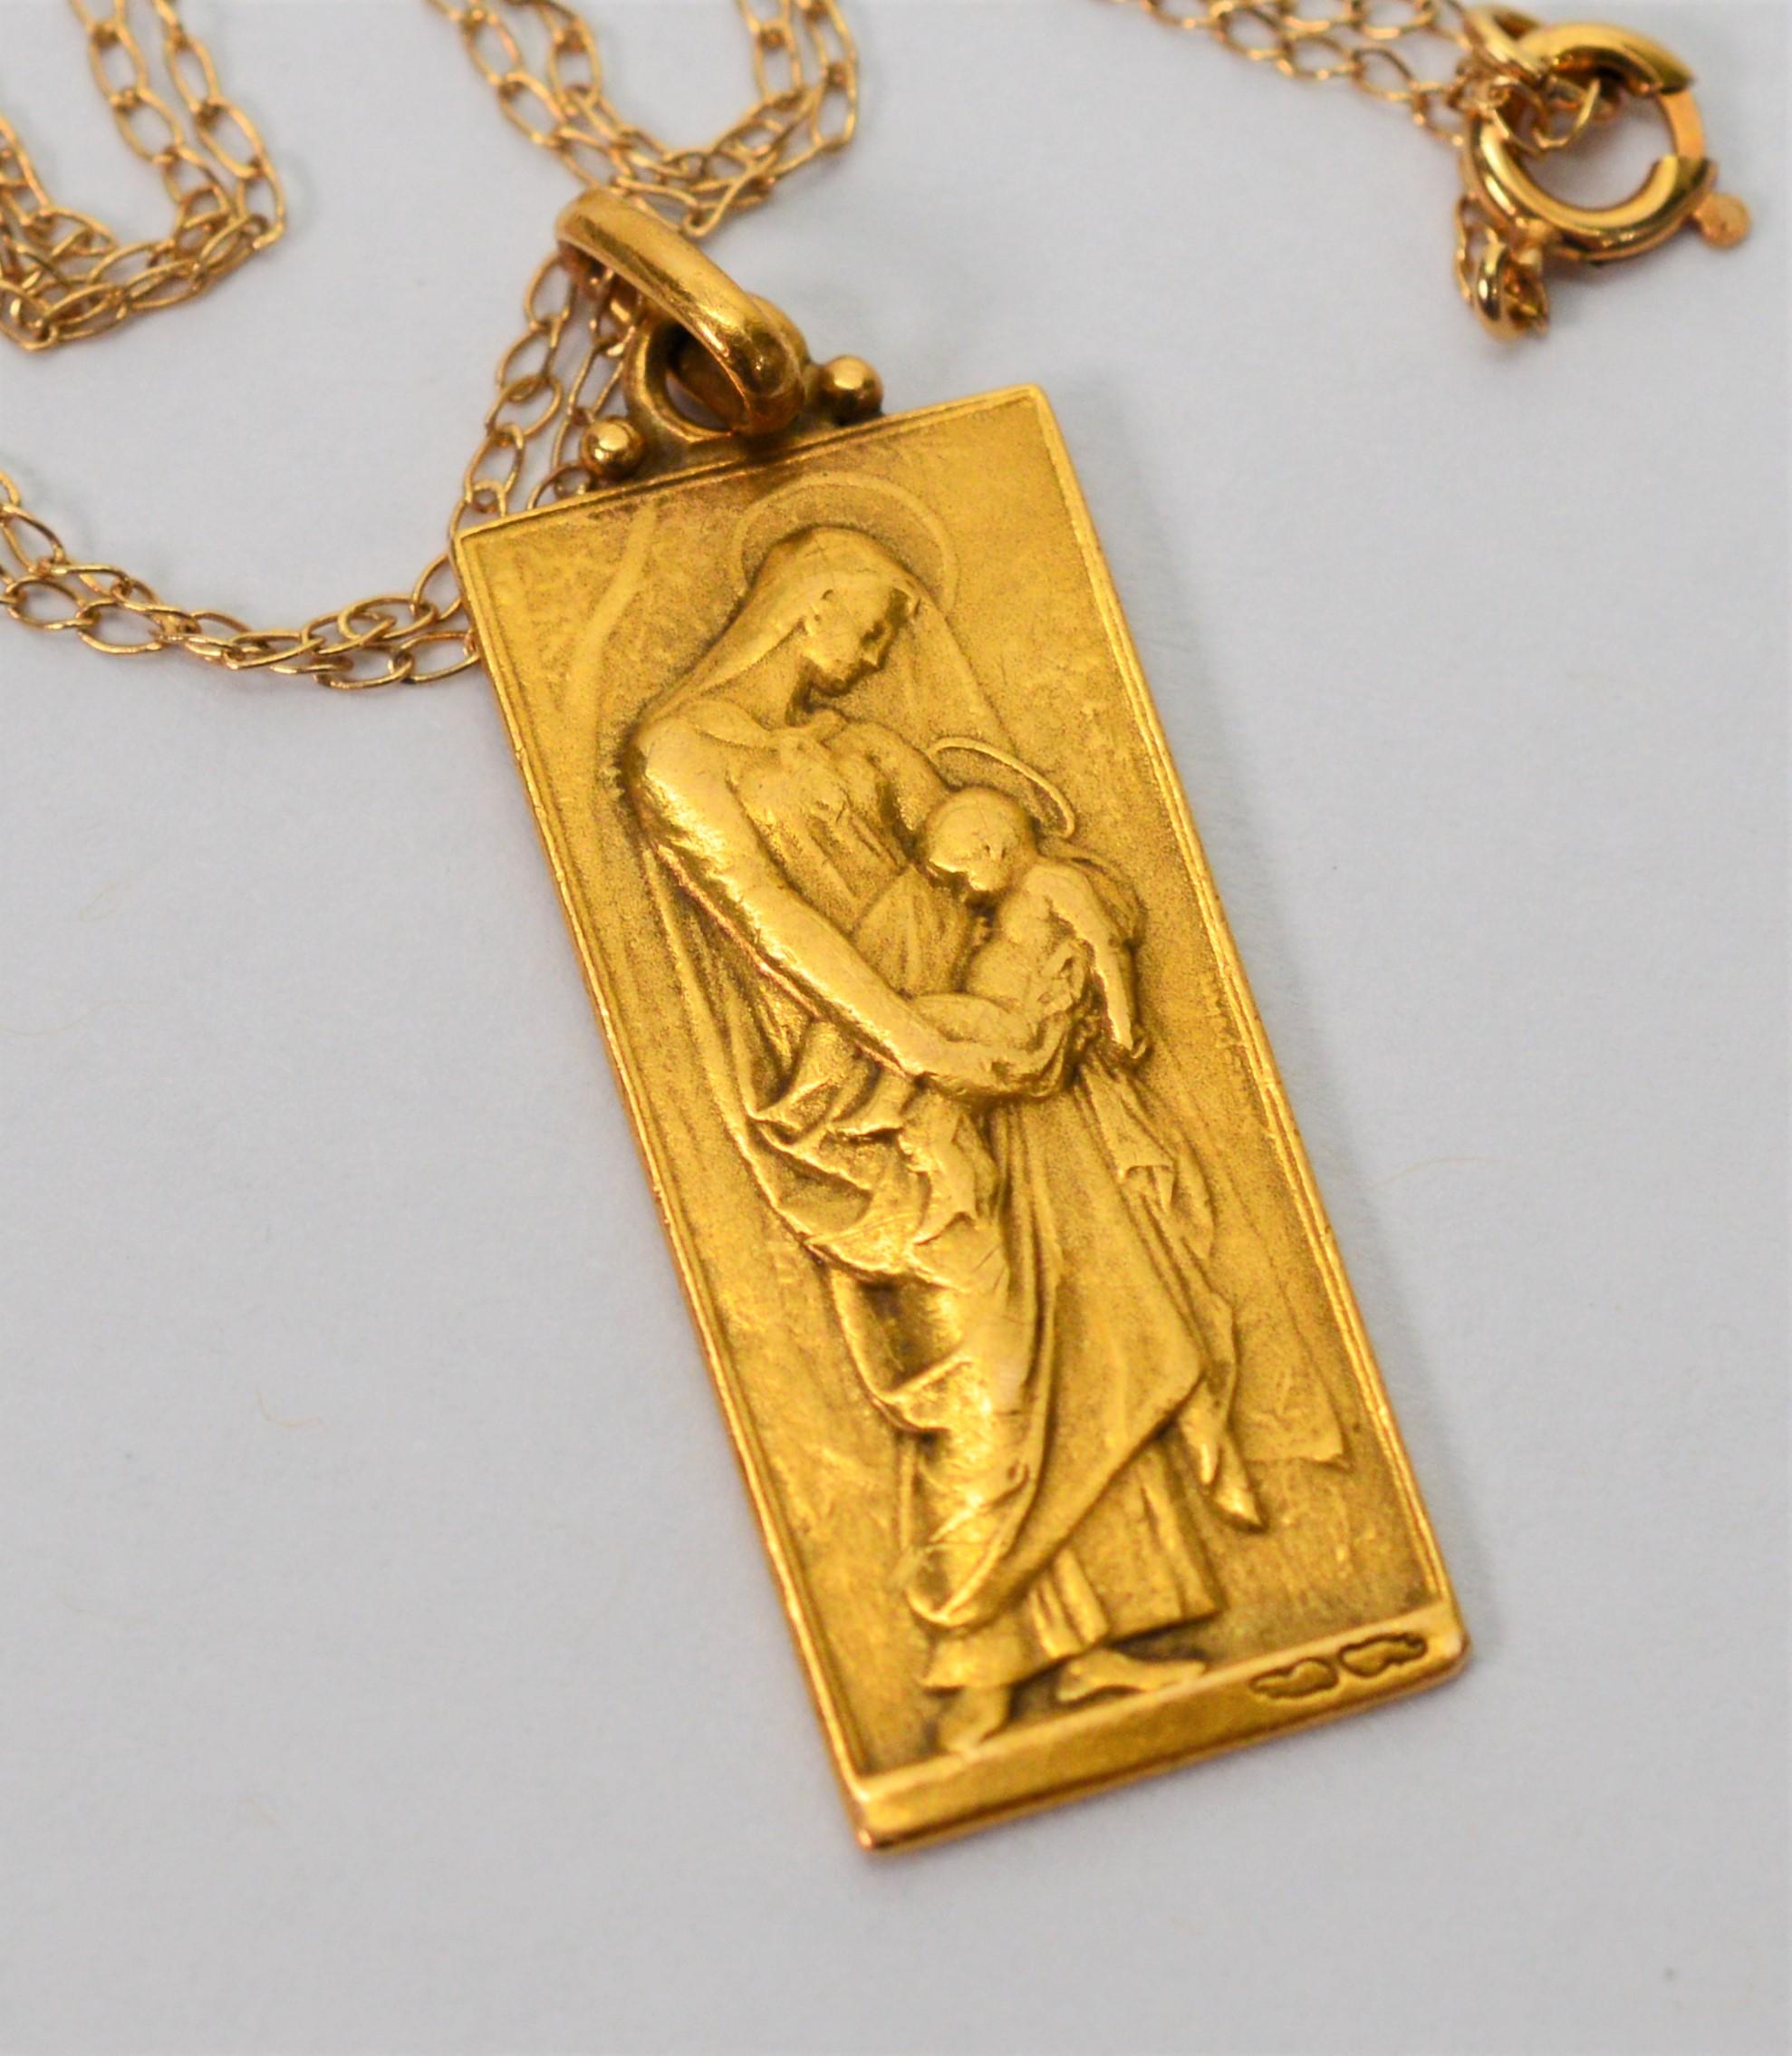 Art Nouveau , circa 1910 and signed, this rare religious French plaque medal pendant in fourteen karat yellow gold has a detailed image of mother and child on front and a rising cross on the reverse.  The medal pendant measures 1 x 3/8 inch and is